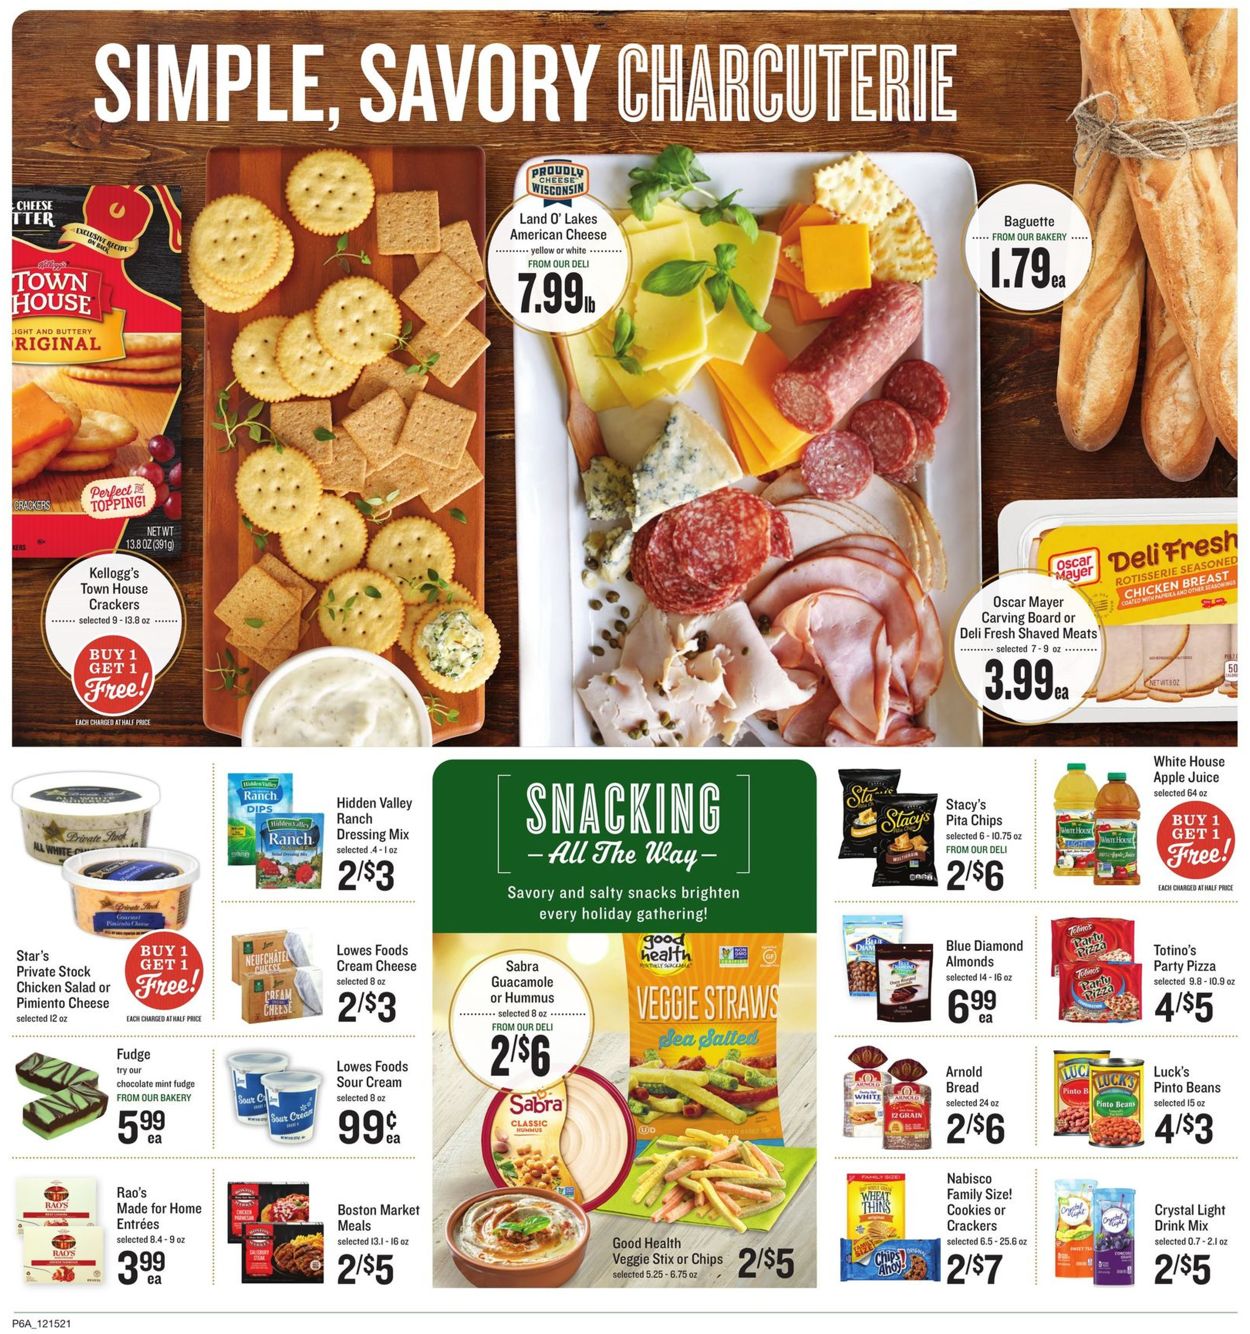 Lowes Foods HOLIDAYS 2021 Weekly Ad Circular - valid 12/15-12/24/2021 (Page 8)